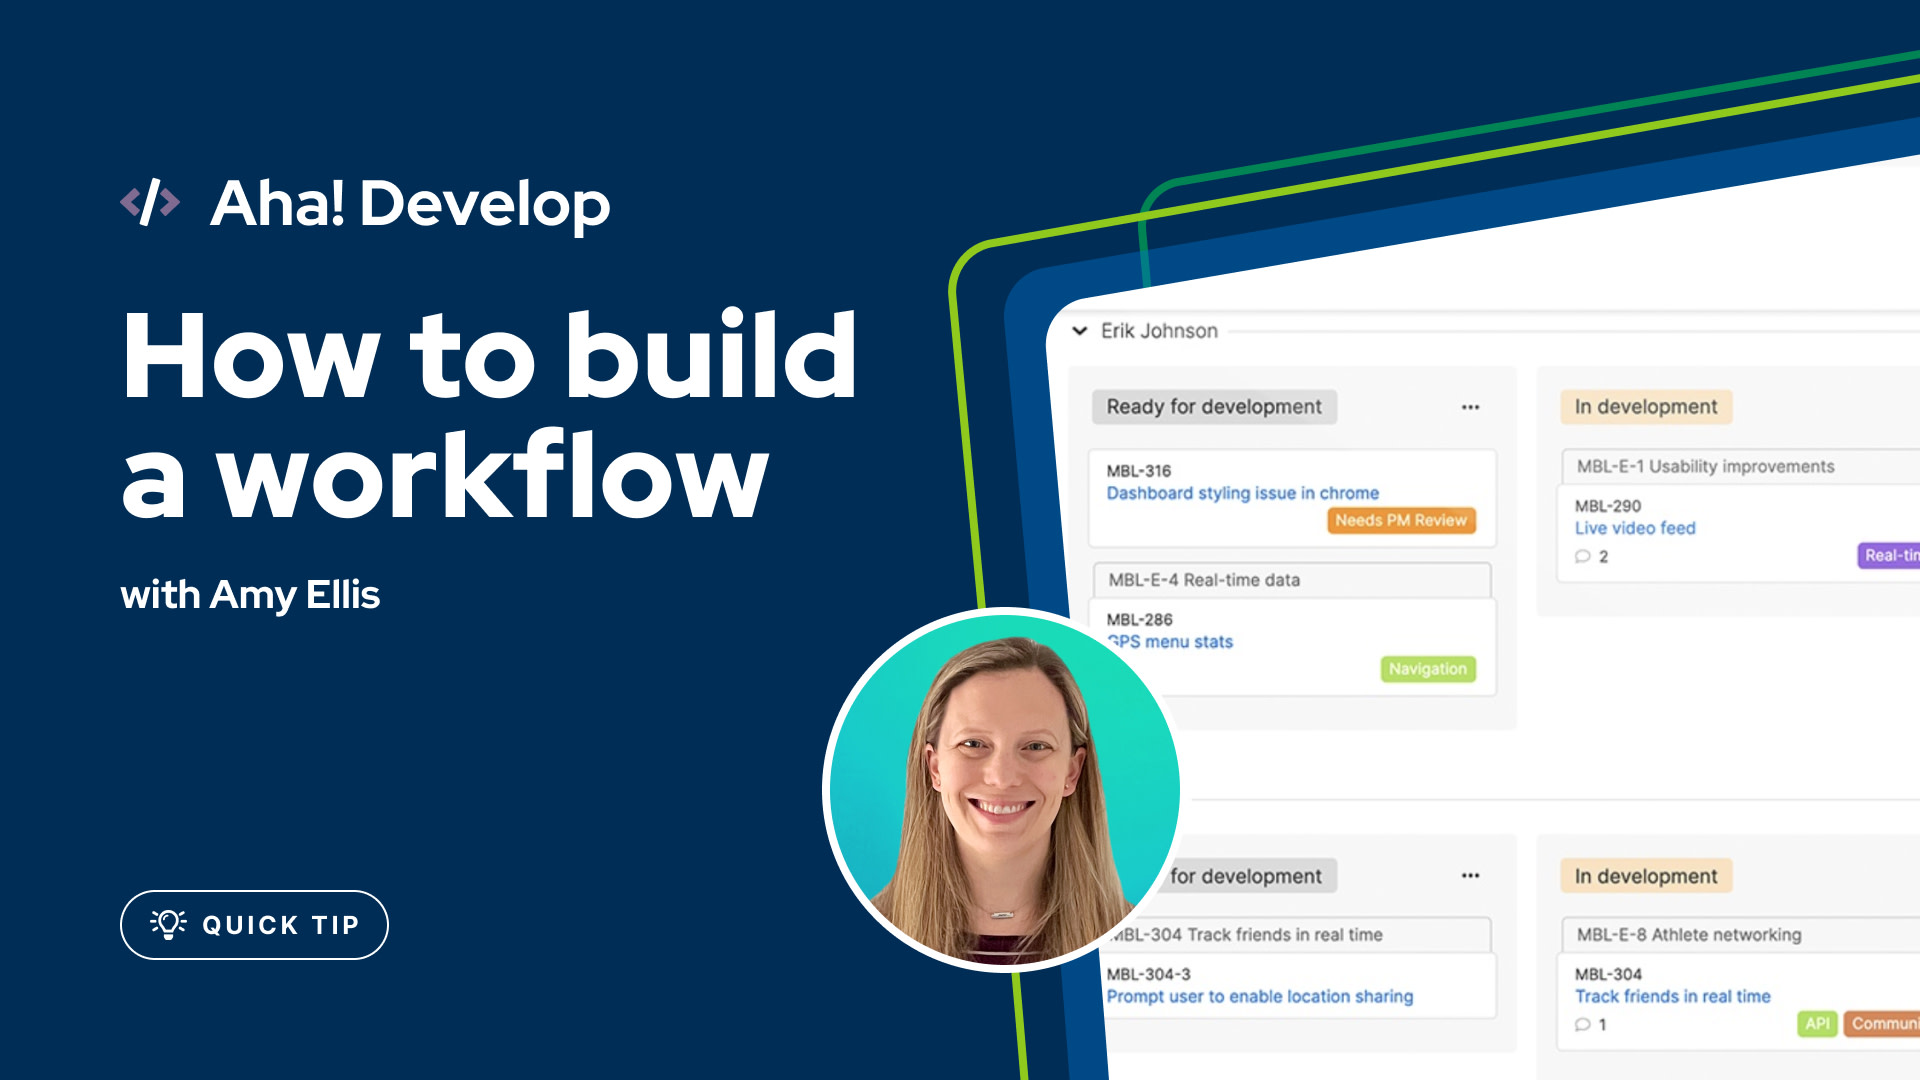 Thumbnail for Aha! Develop - how to build a workflow quick tips video